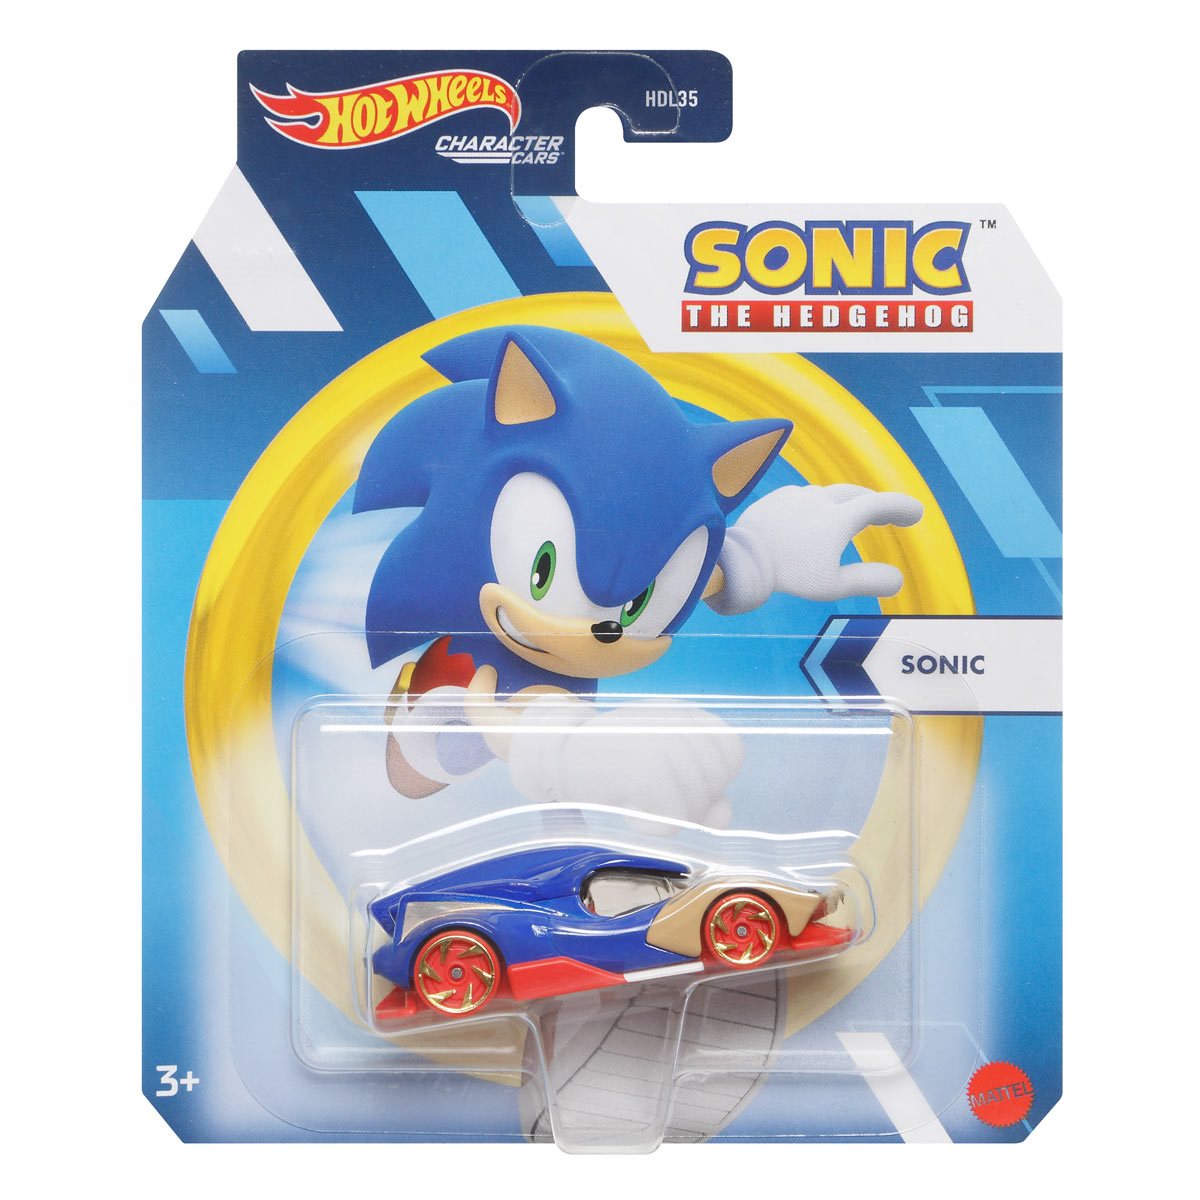 Hot Wheels Entertainment Character Cars - Sonic the Hedgehog